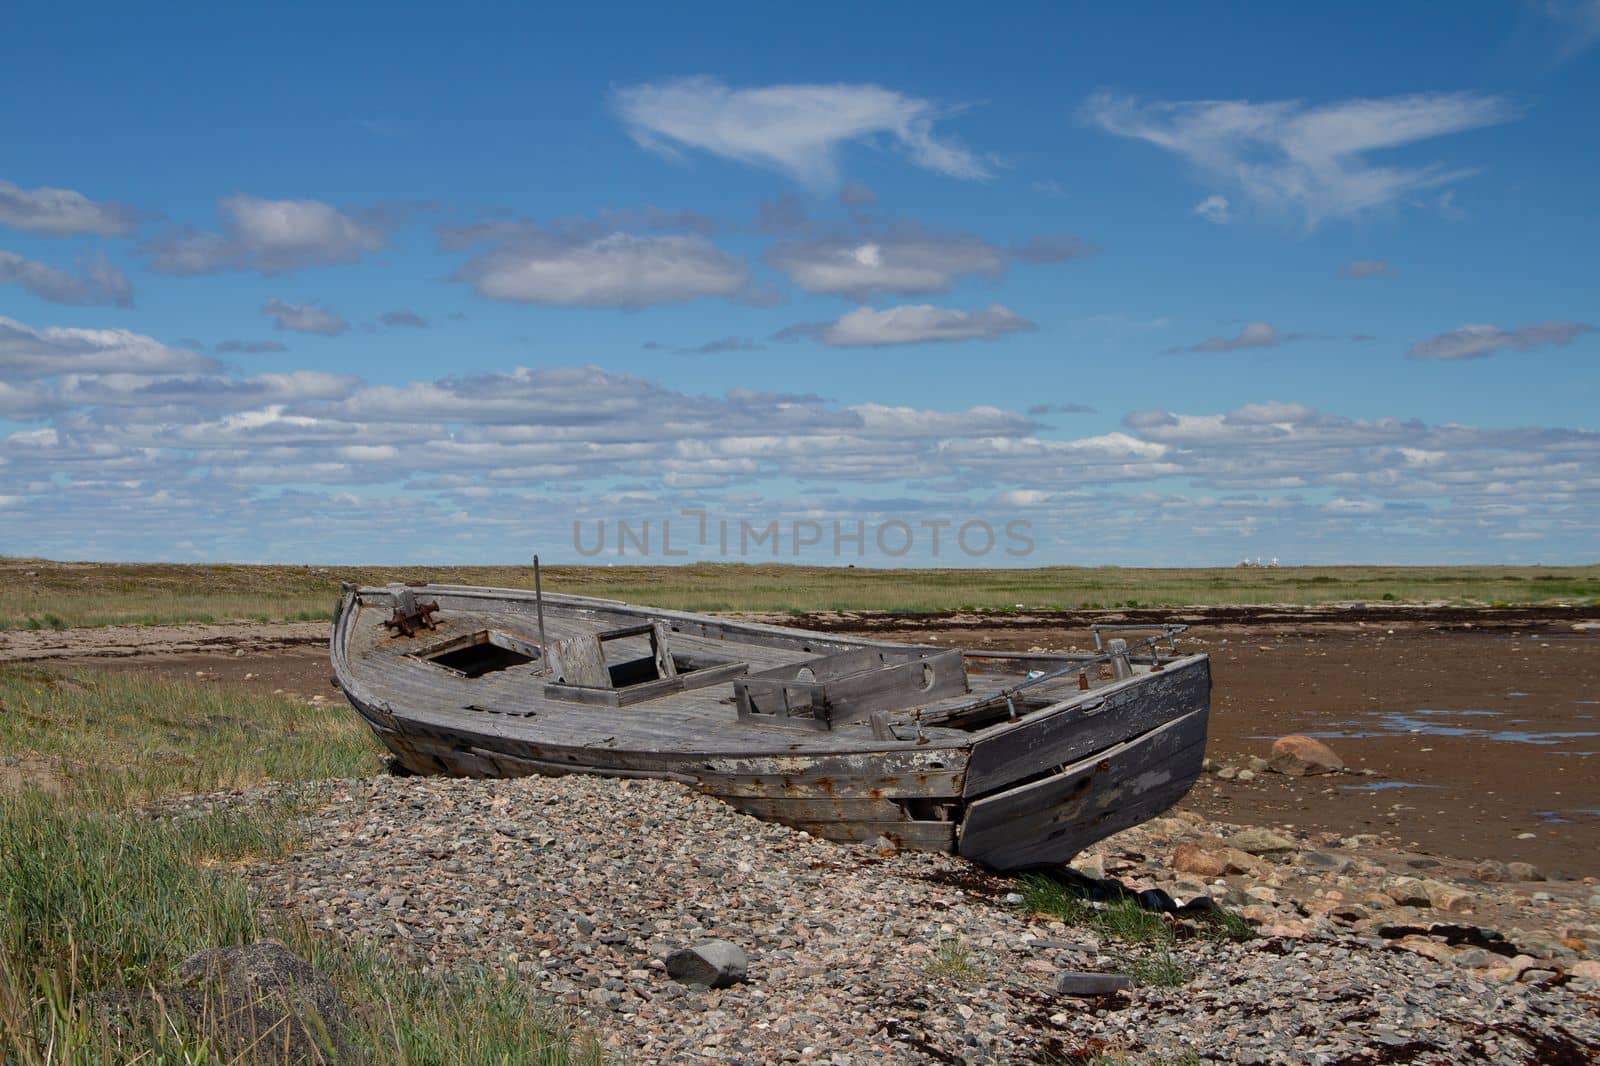 Side view of old wooden boat wrecked and stranded on a rocky shoreline by Granchinho